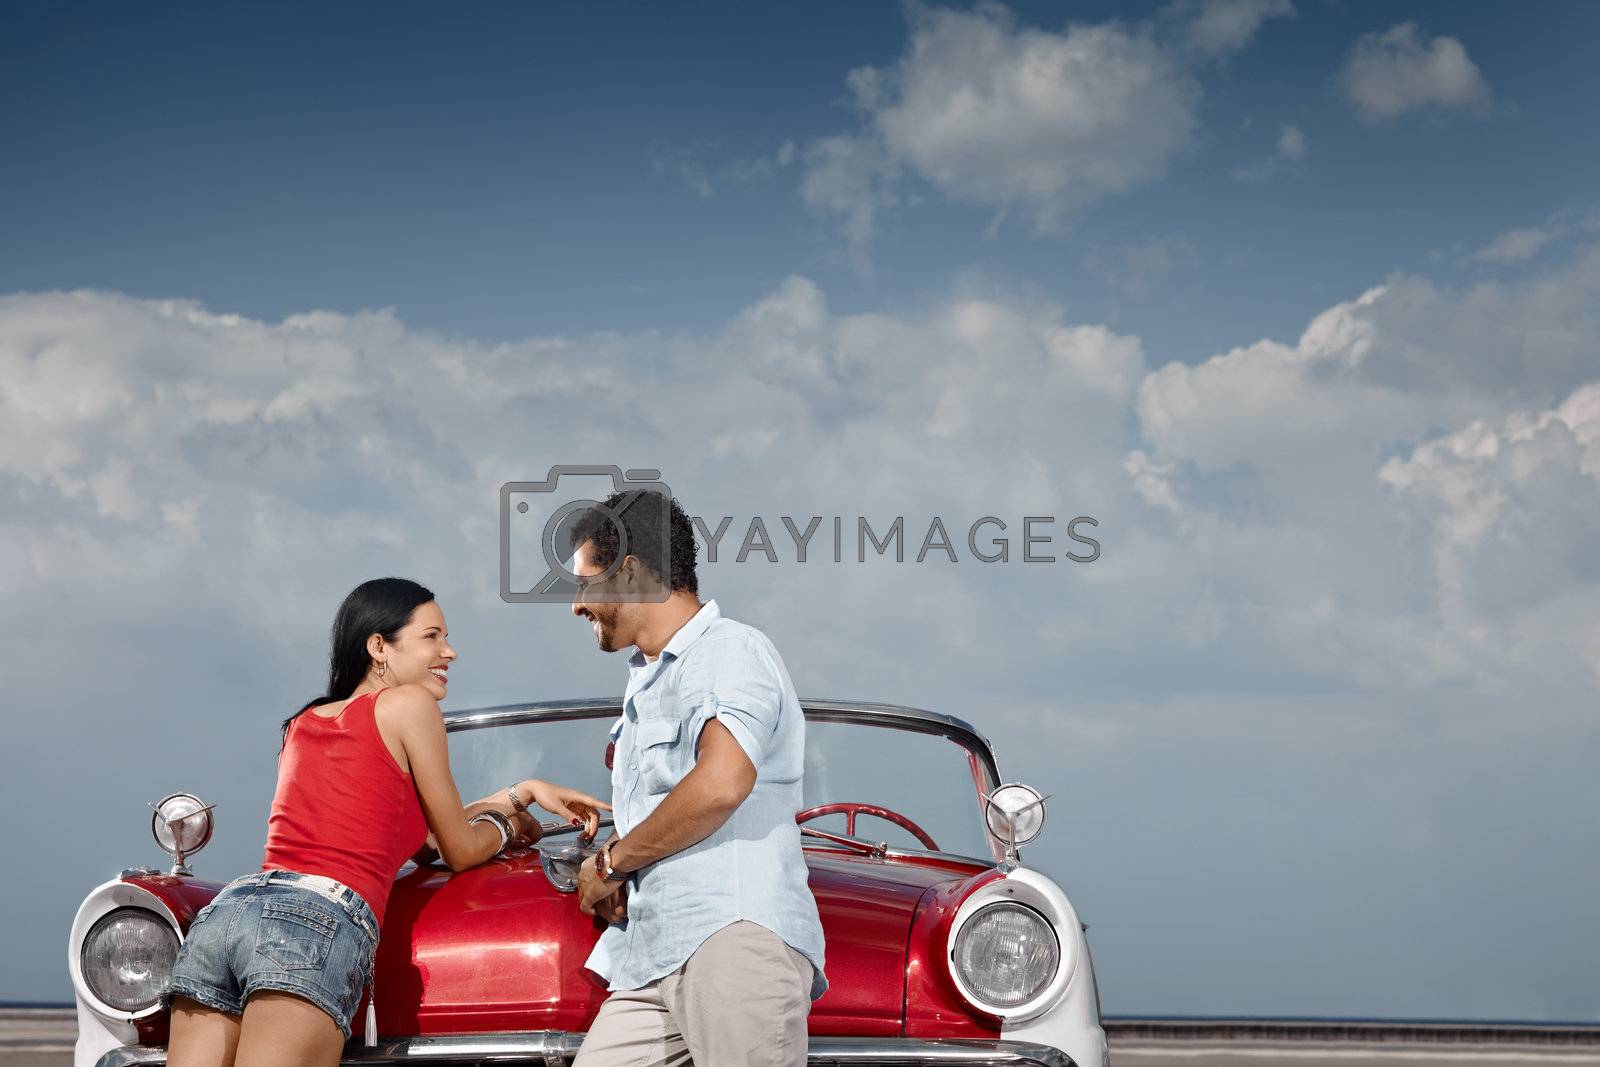 Royalty free image of man and beautiful woman leaning on cabriolet car by diego_cervo